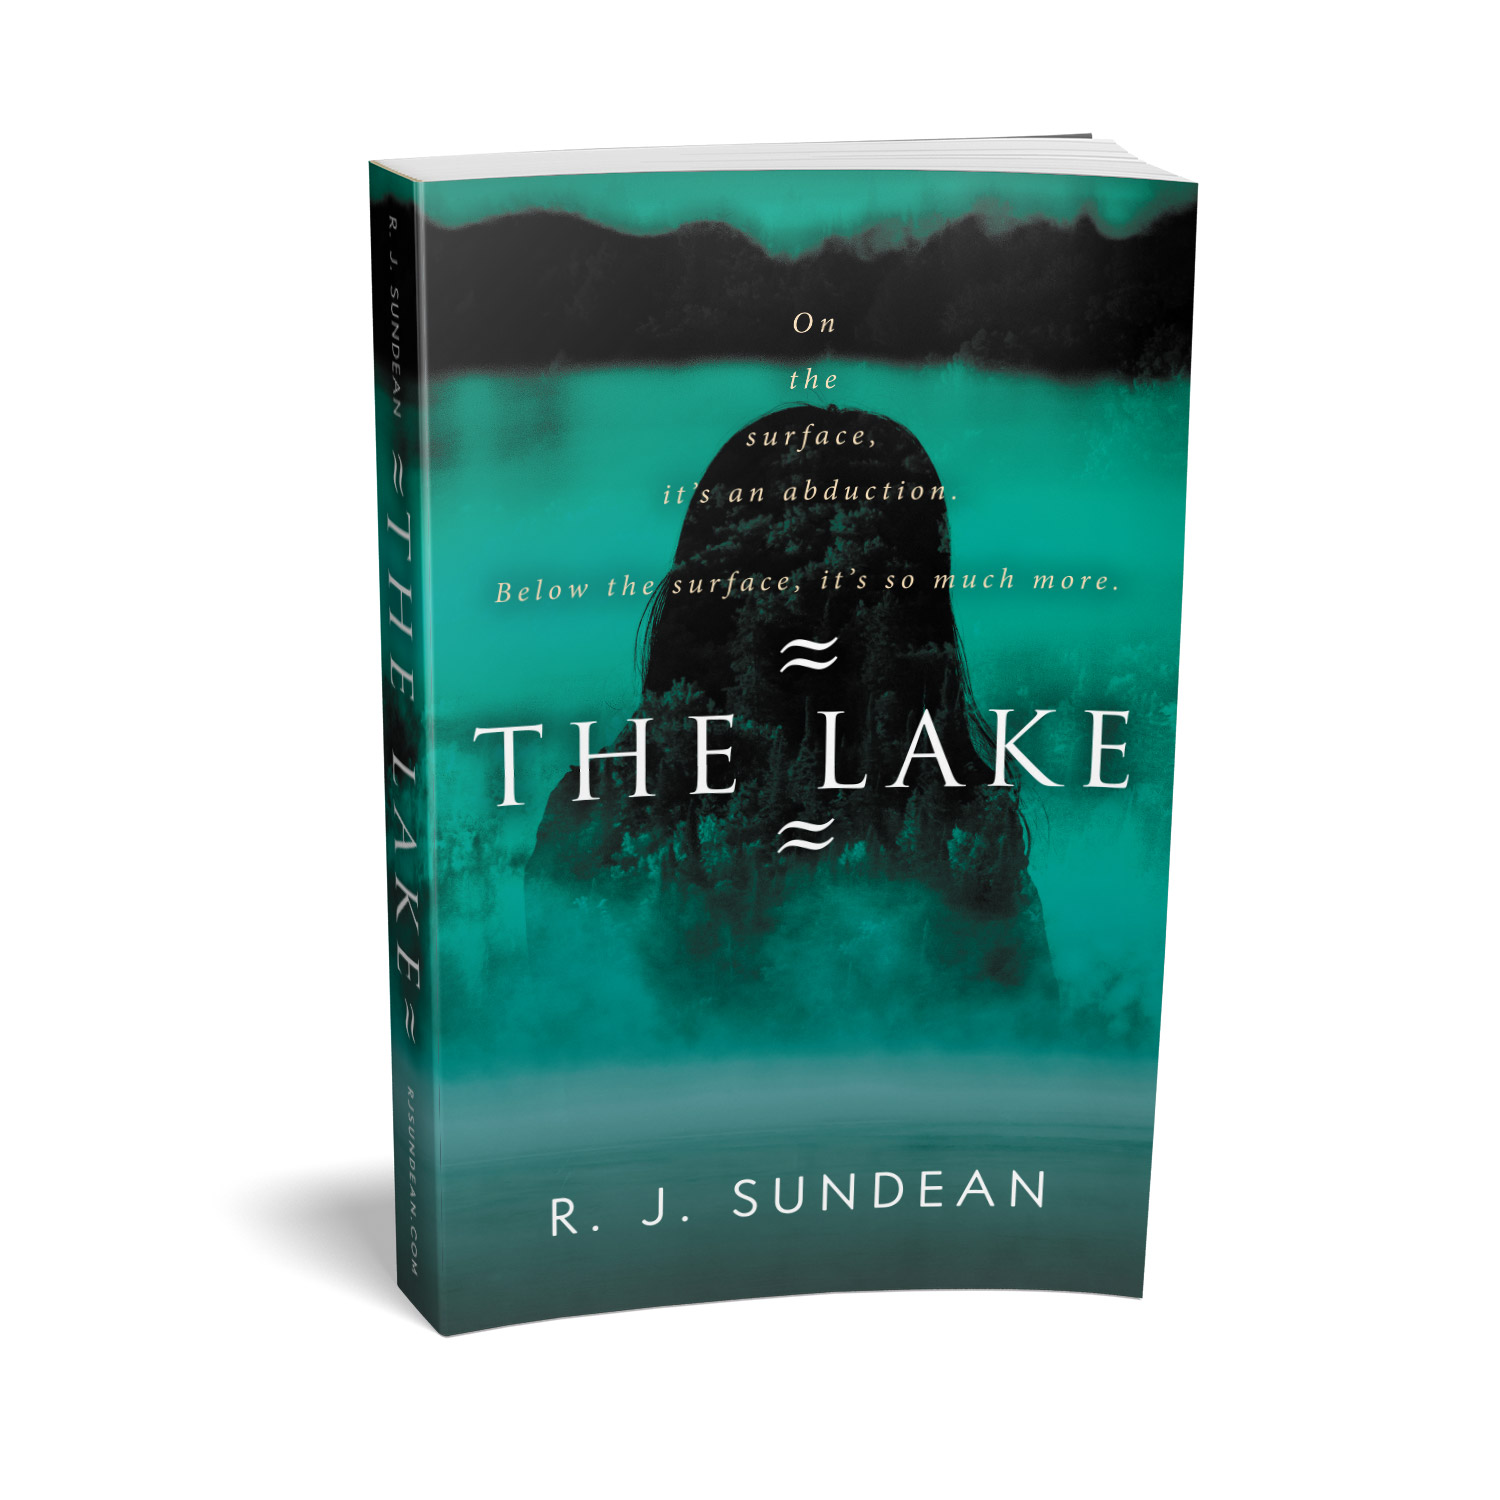 'The Lakes' is an atmospheric threat thriller. The author is RJ Sundean. The cover and interior design of the book are by Mark Thomas. To learn more about what Mark could do for your book, please visit coverness.com.